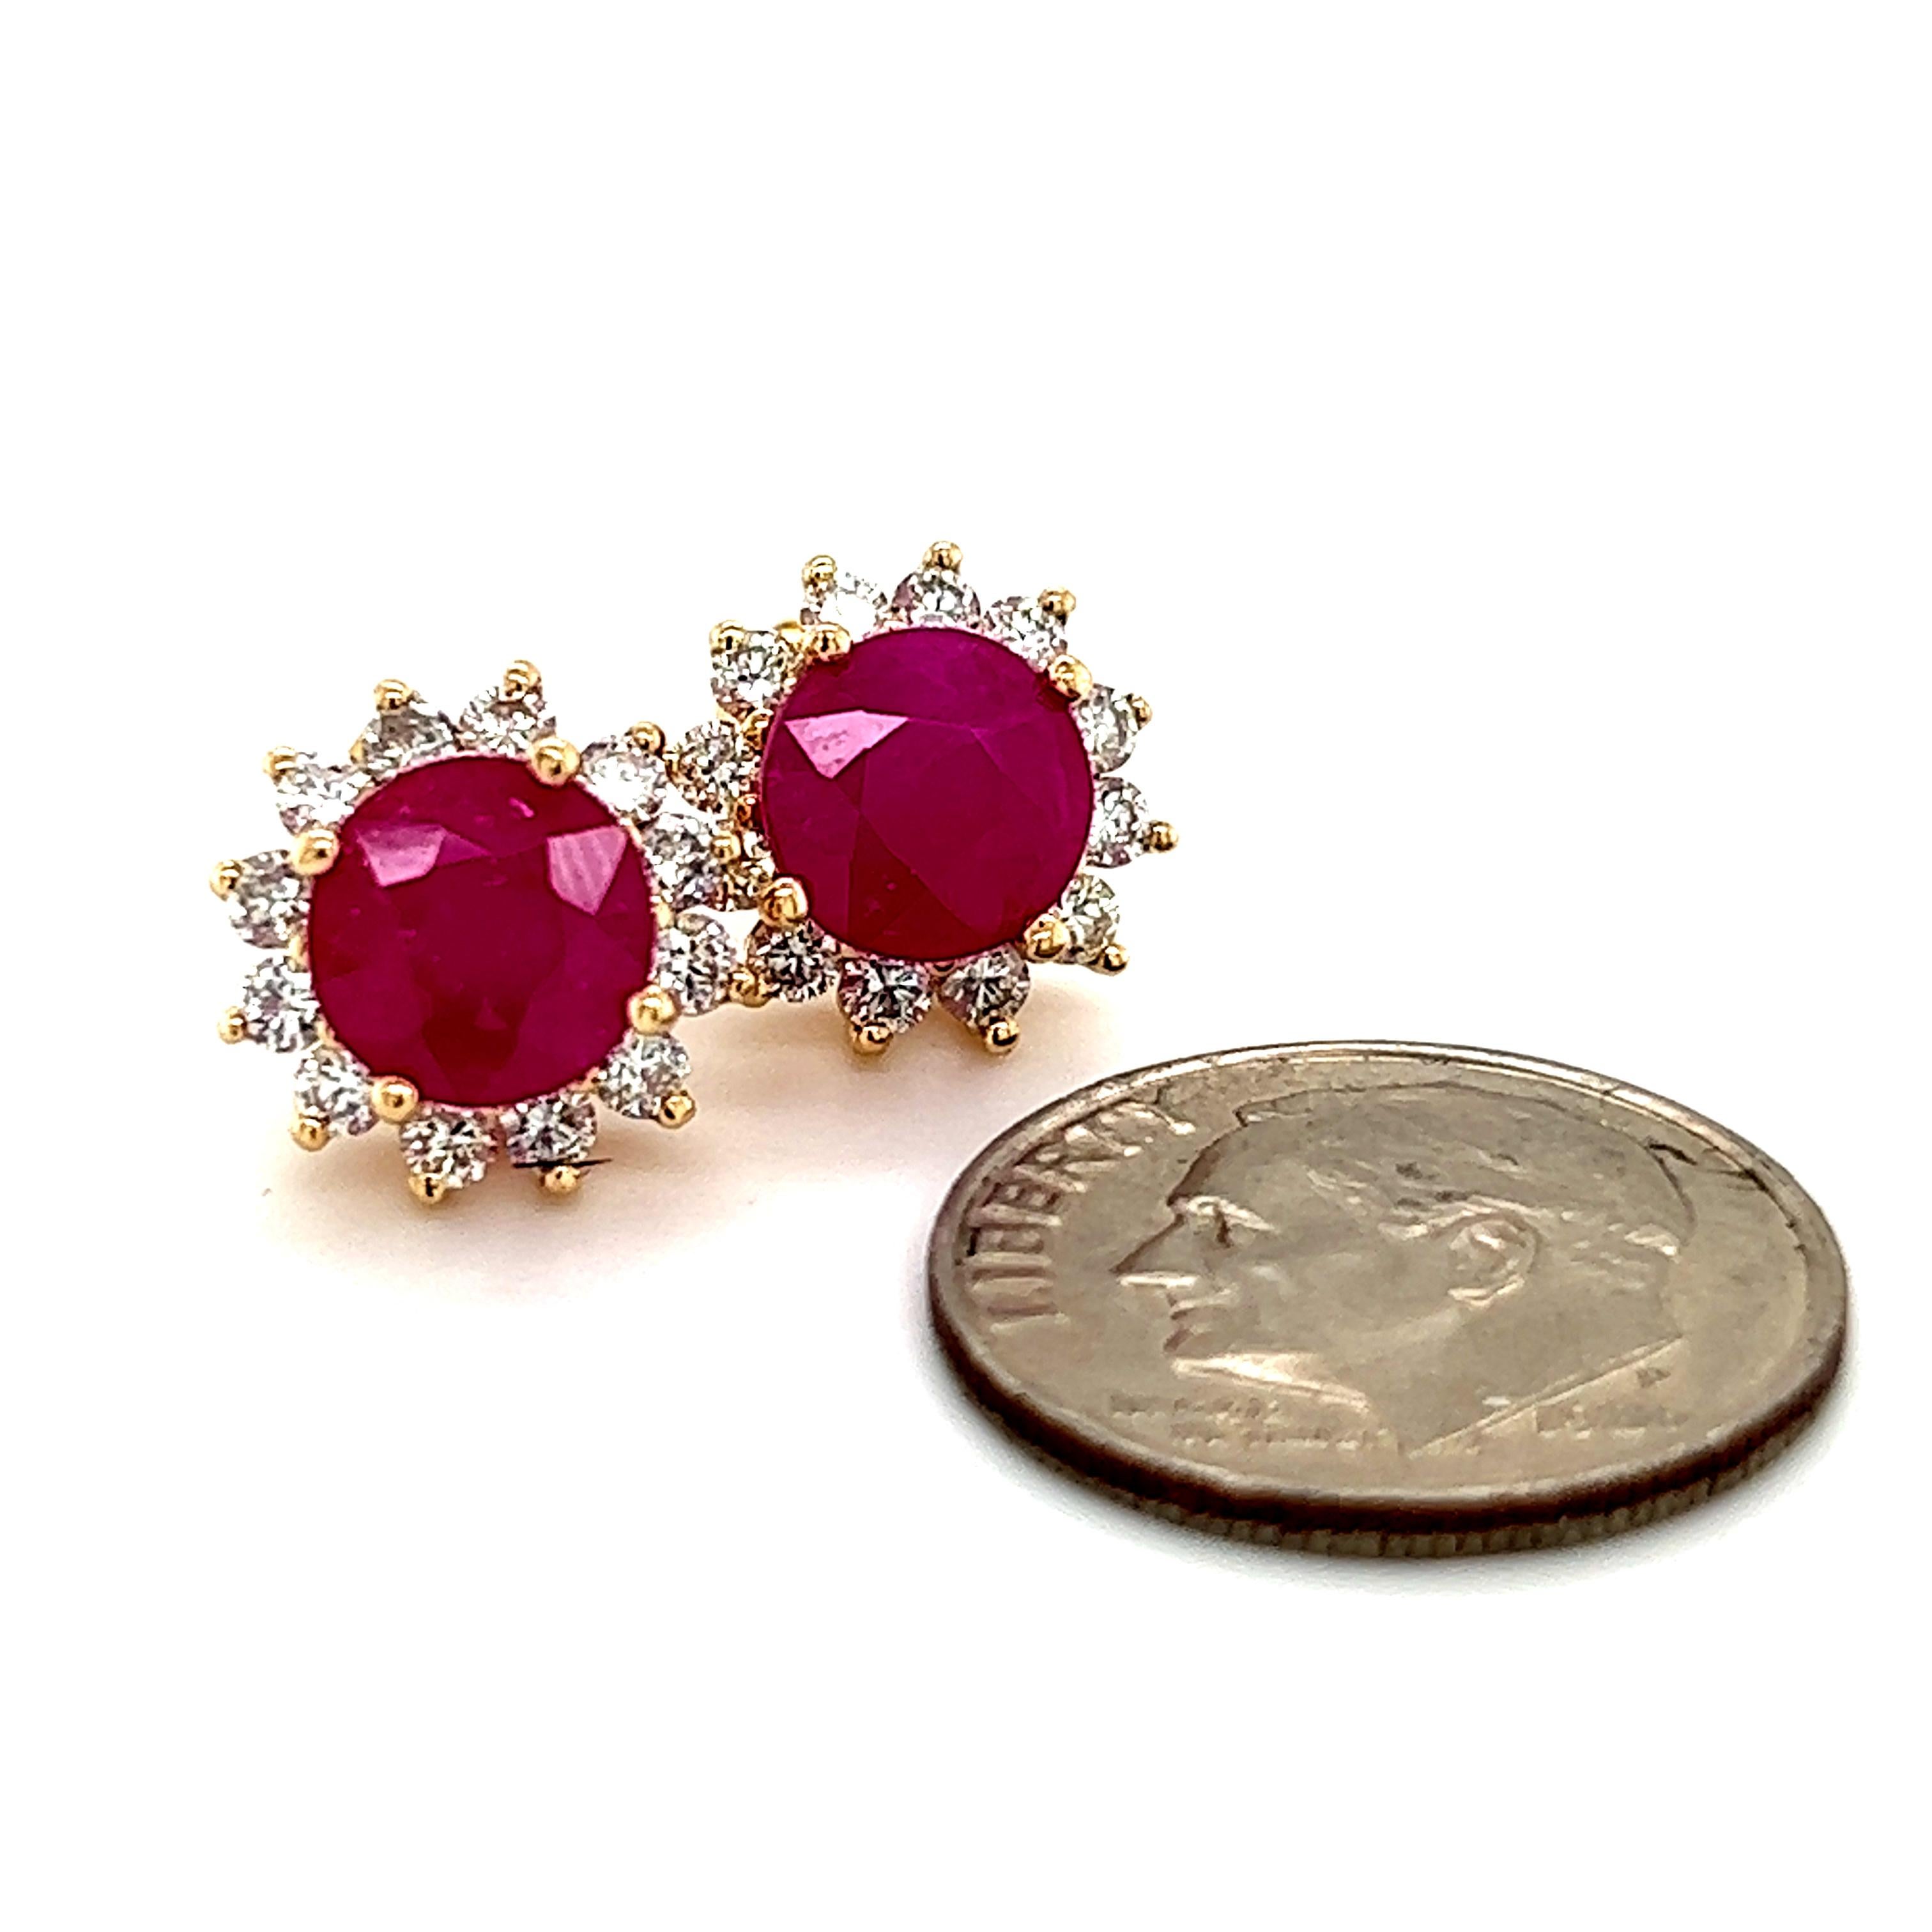 Natural Ruby Diamond Earrings 14k Gold 3.72 TCW Certified For Sale 2